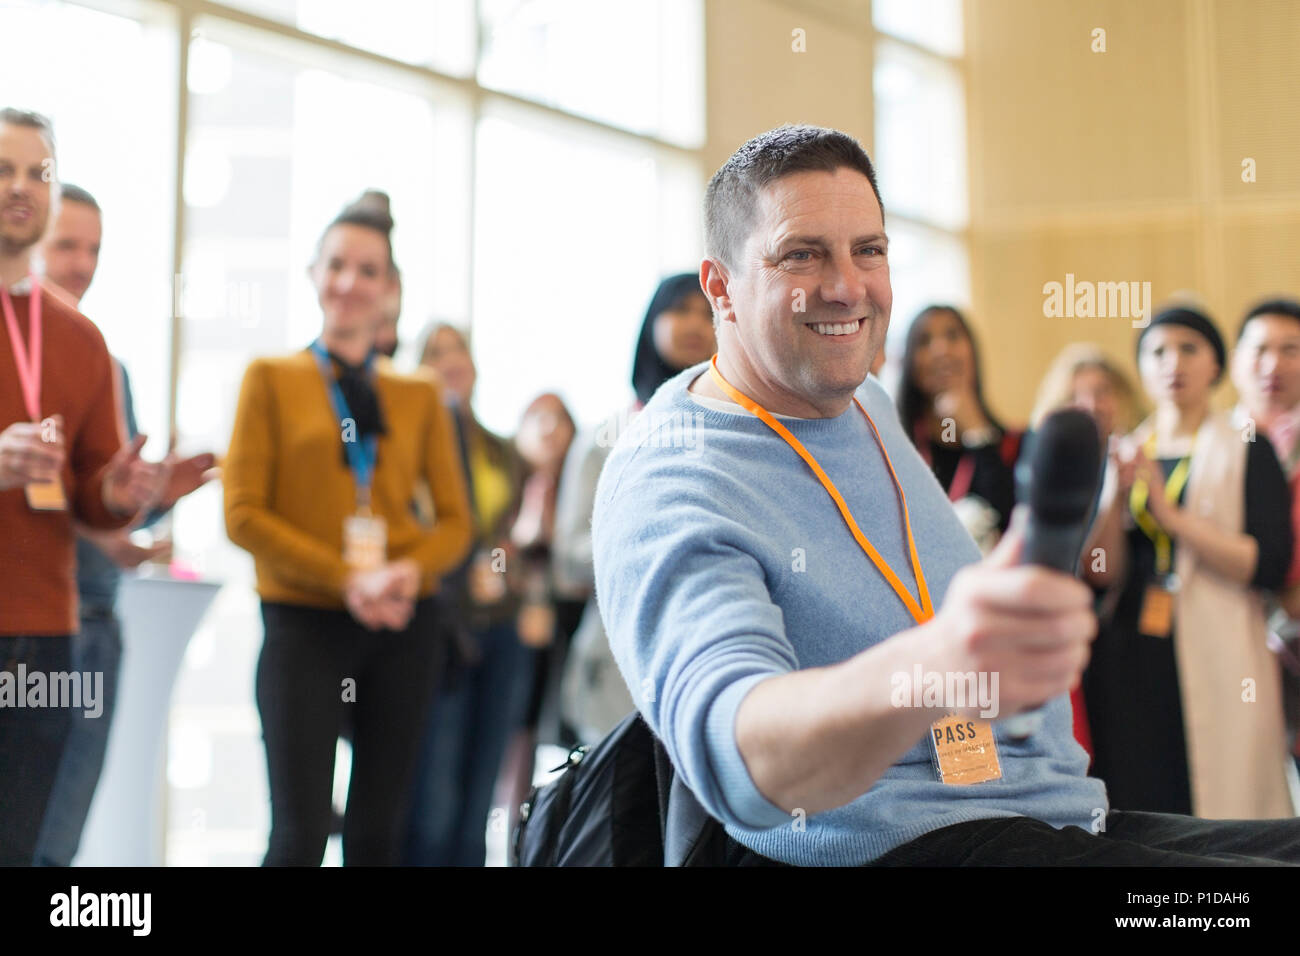 Smiling male speaker answering audience questions Stock Photo